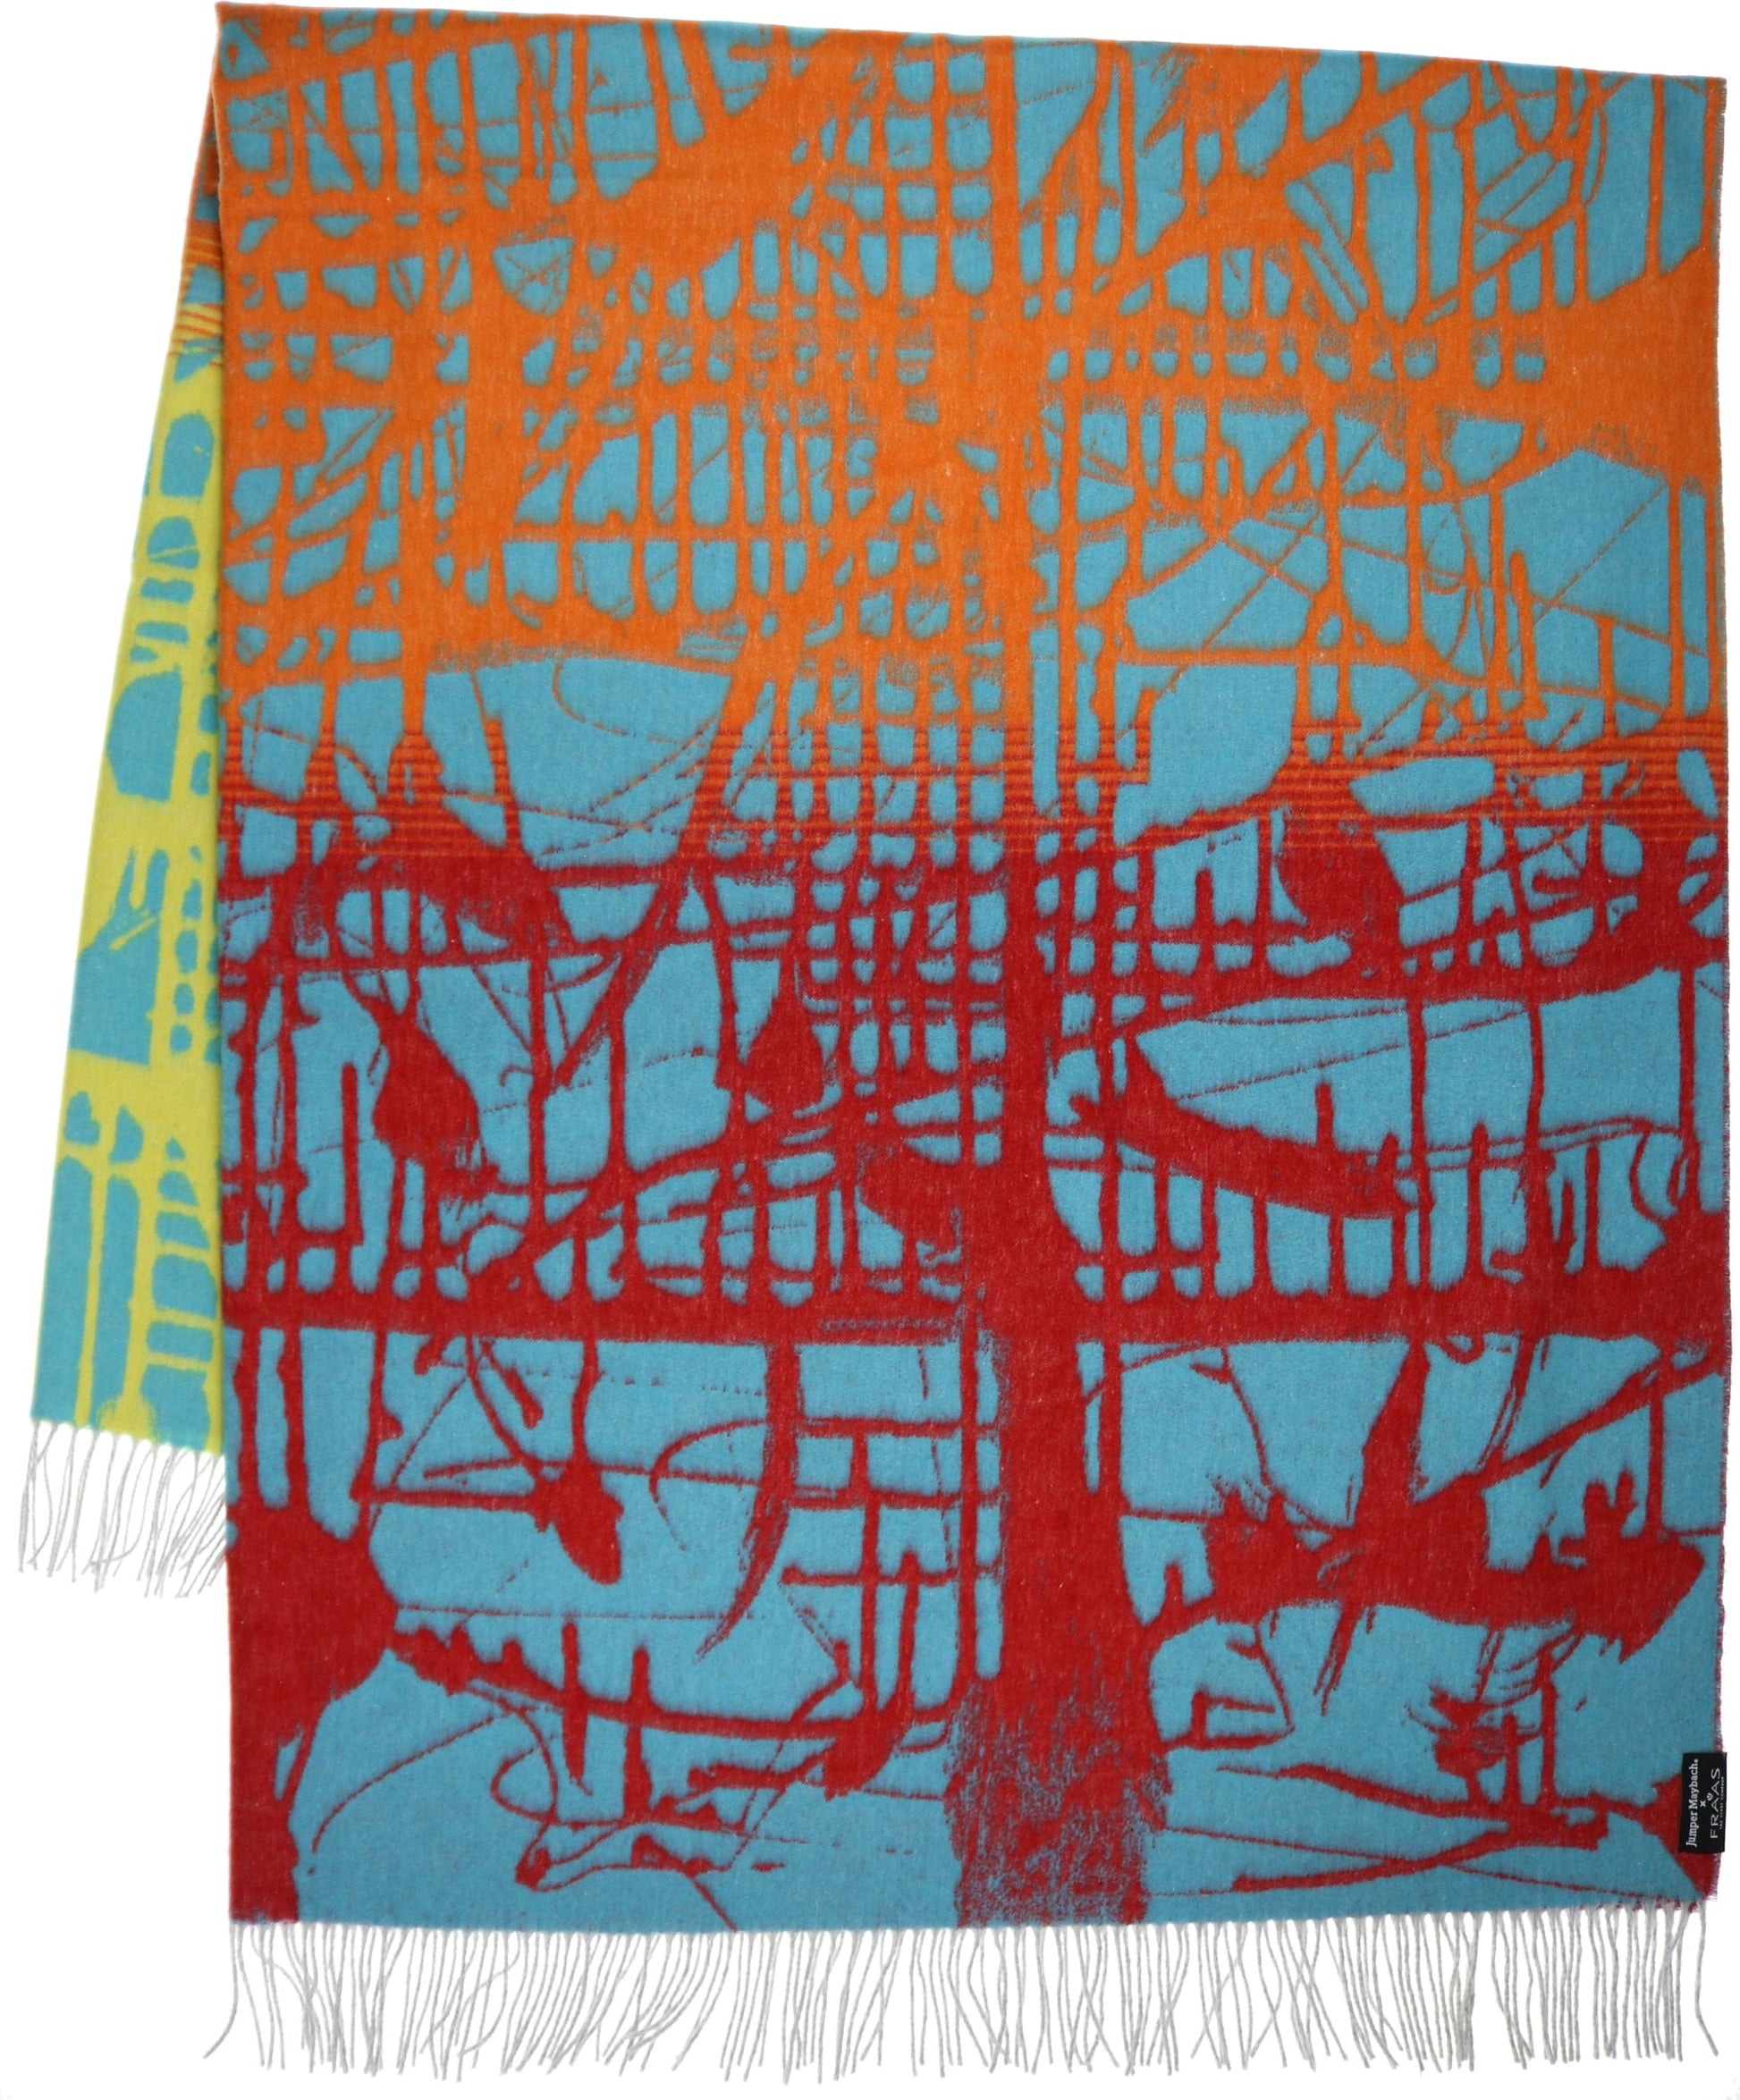 Jumper Maybach X FRAAS "Matrix" Recycled Cotton Throw - Turquoise 2